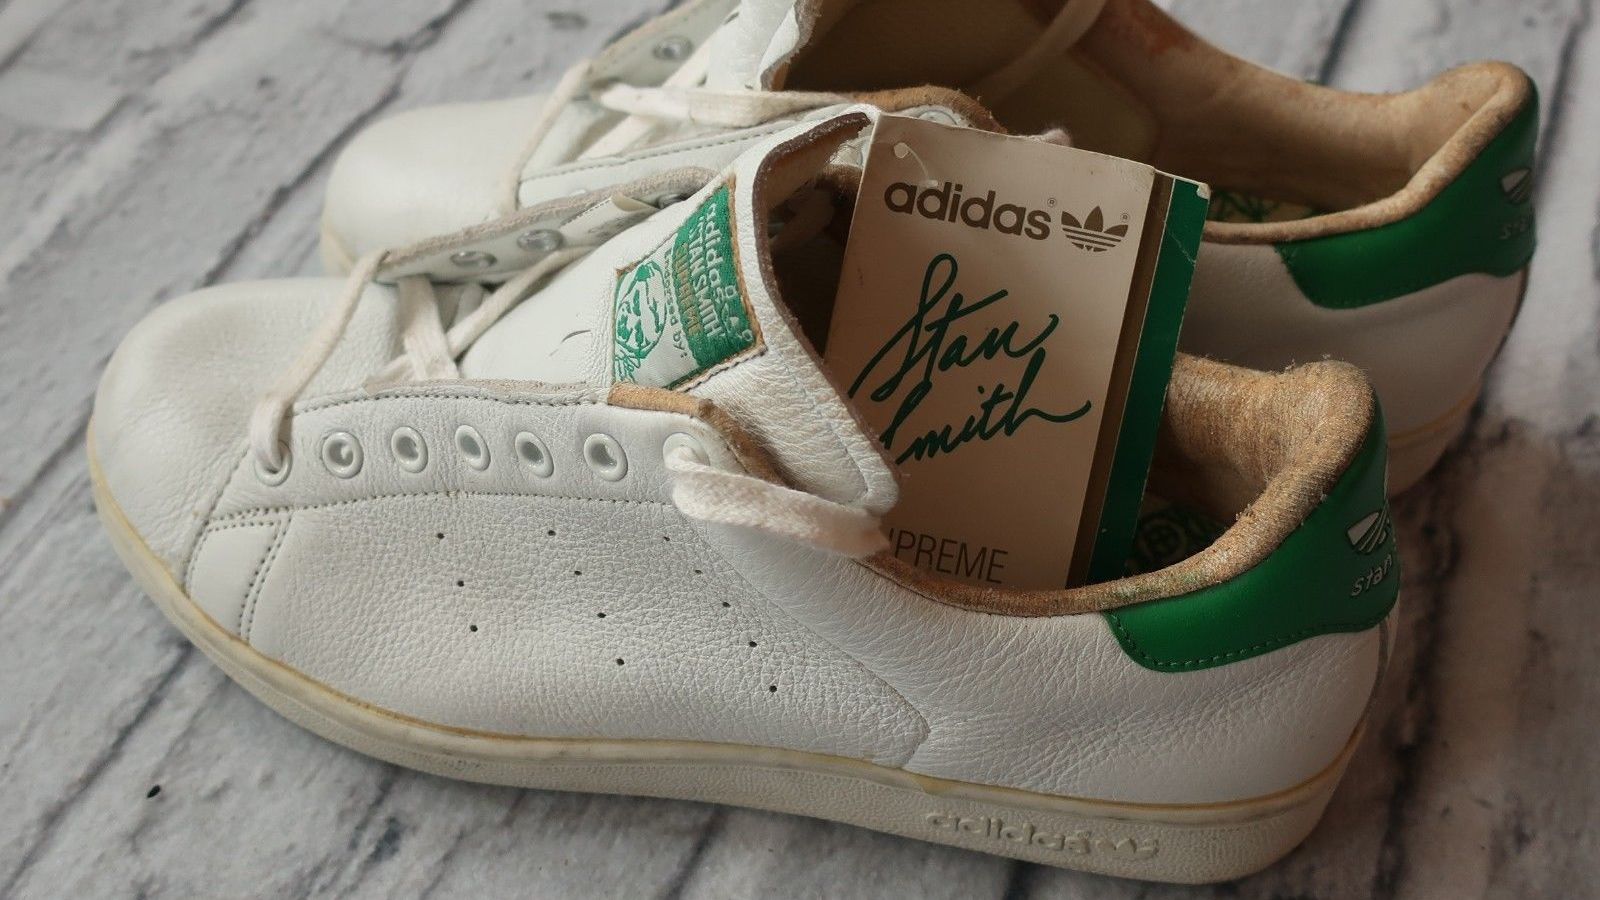 first stan smith shoe